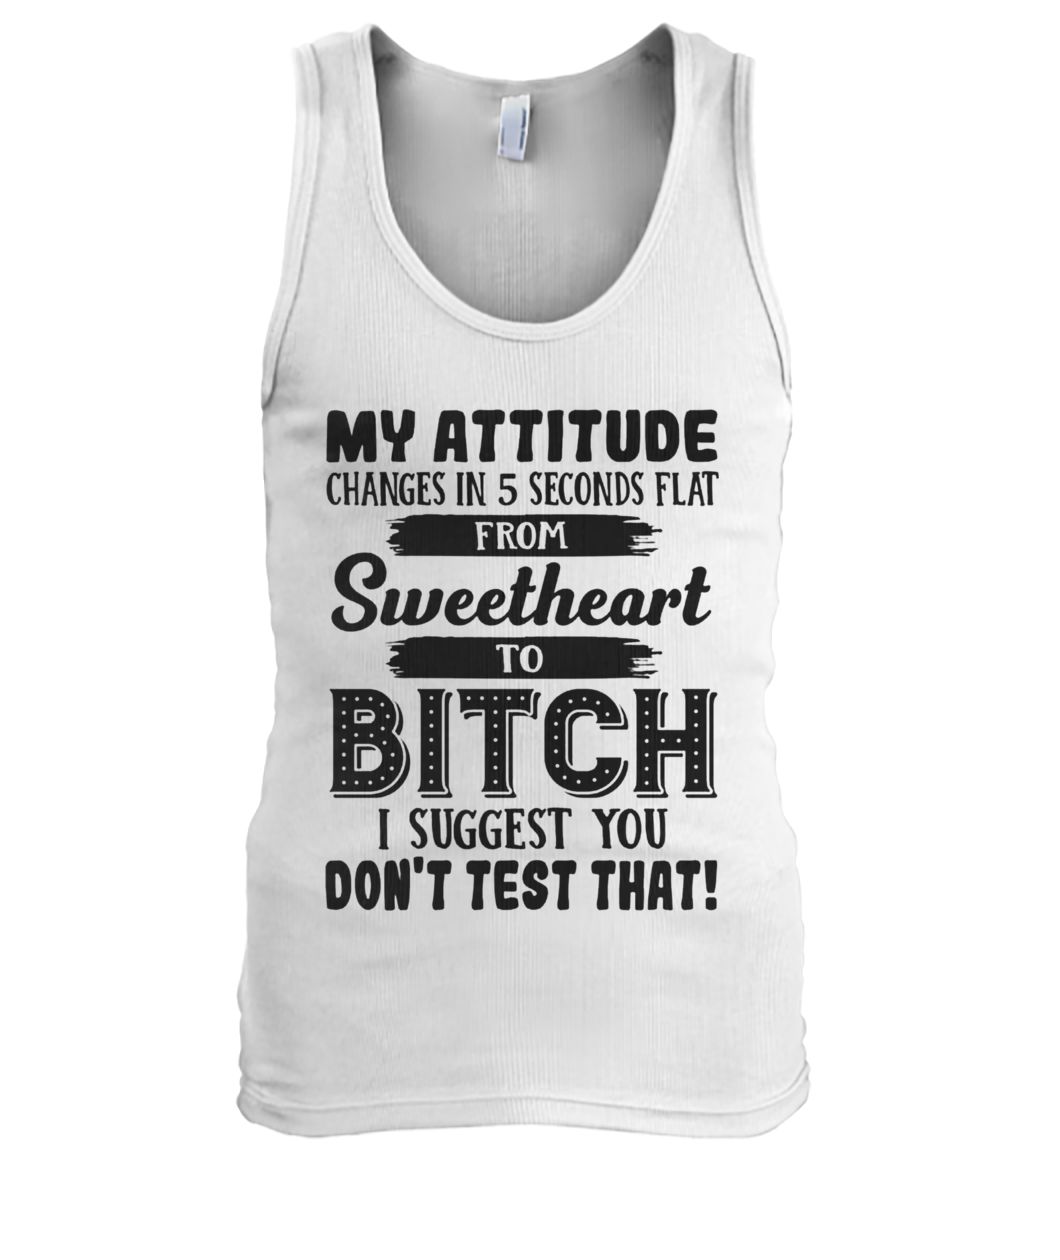 My attitude changes in 5 seconds flat from sweetheart men's tank top